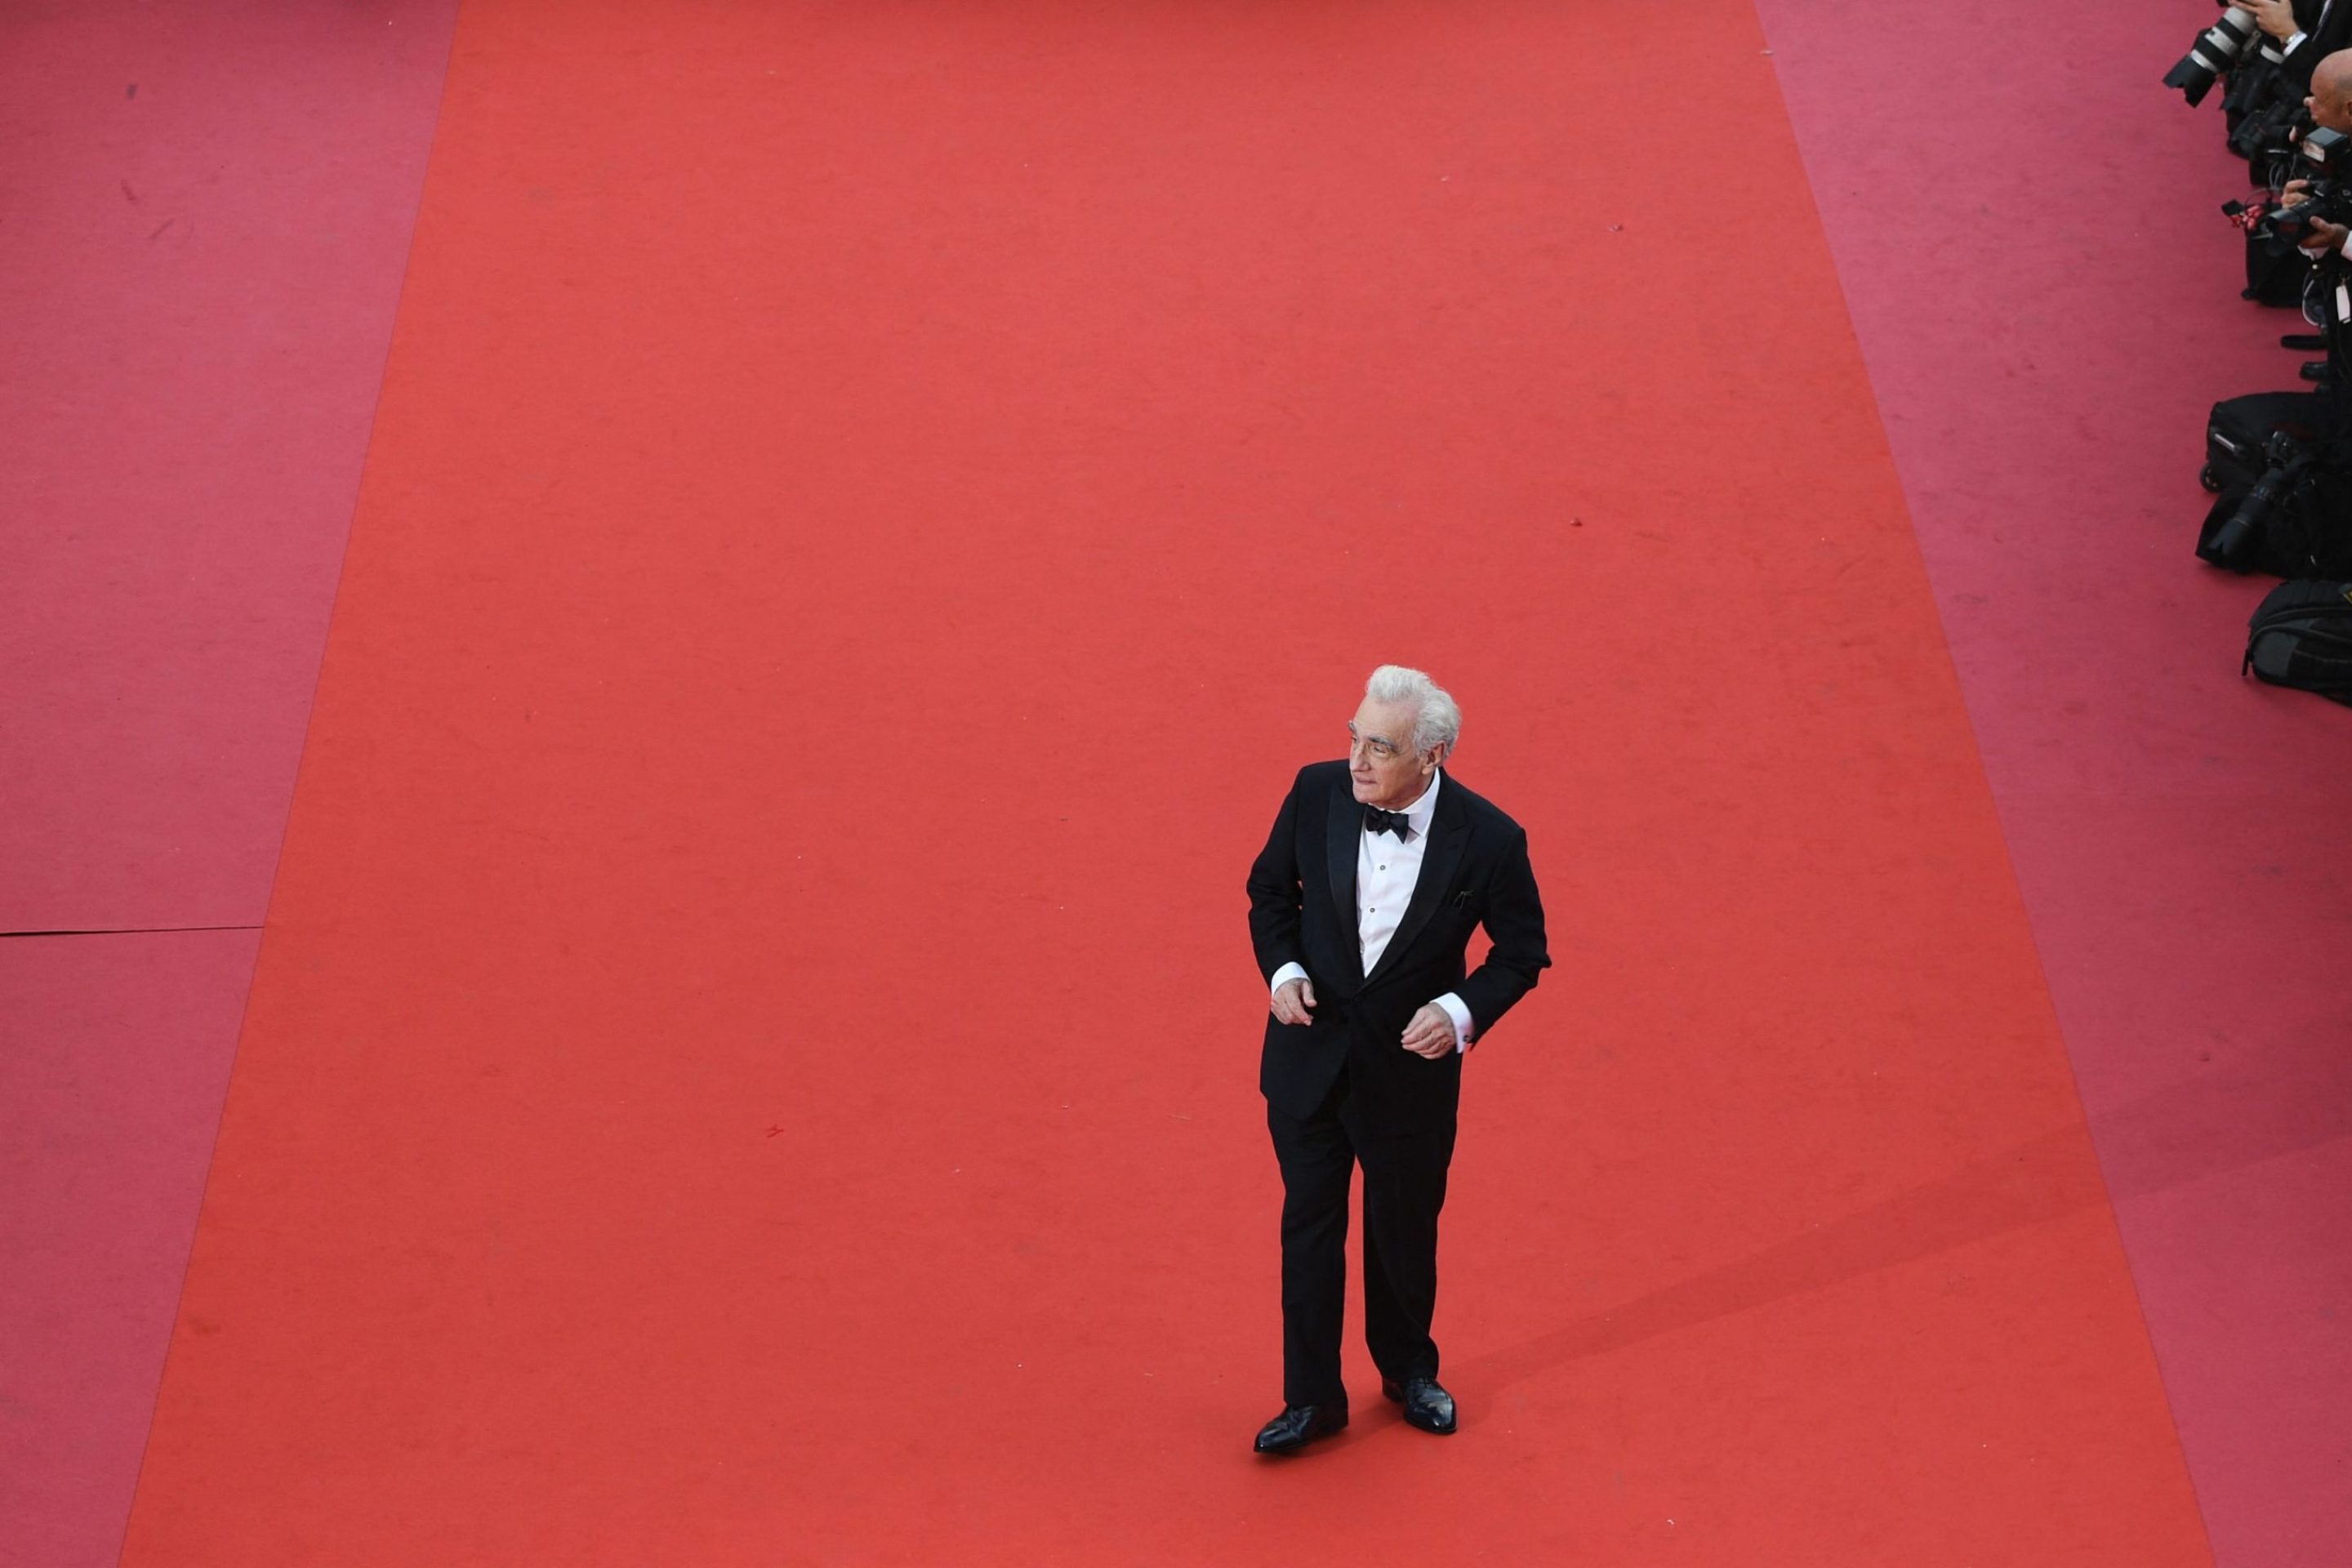 TOPSHOT - US director Martin Scorsese poses as he arrives on May 8, 2018 for the screening of the film "Todos Lo Saben (Everybody Knows)" and the opening ceremony of the 71st edition of the Cannes Film Festival in Cannes, southern France. (Photo by Antonin THUILLIER / AFP) (Photo by ANTONIN THUILLIER/AFP via Getty Images)